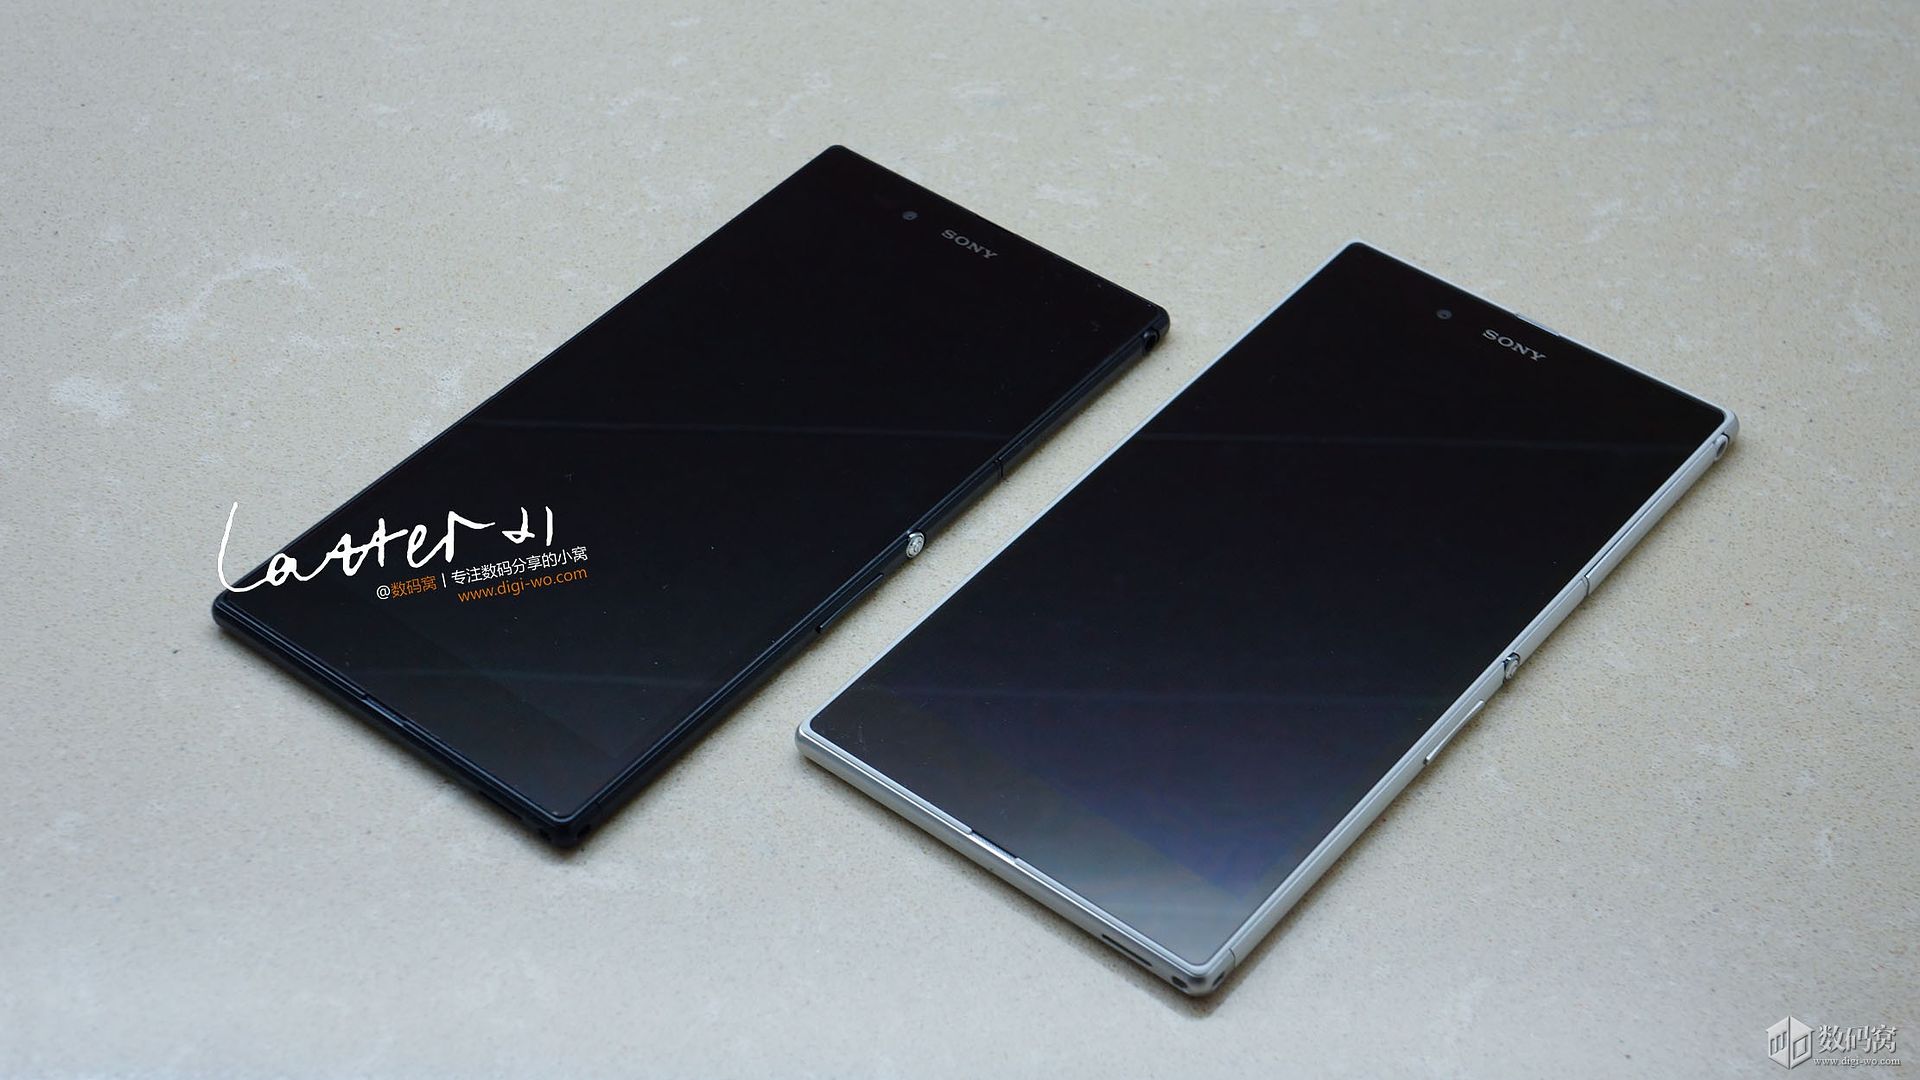 Xperia Z Ultra hands on pictures